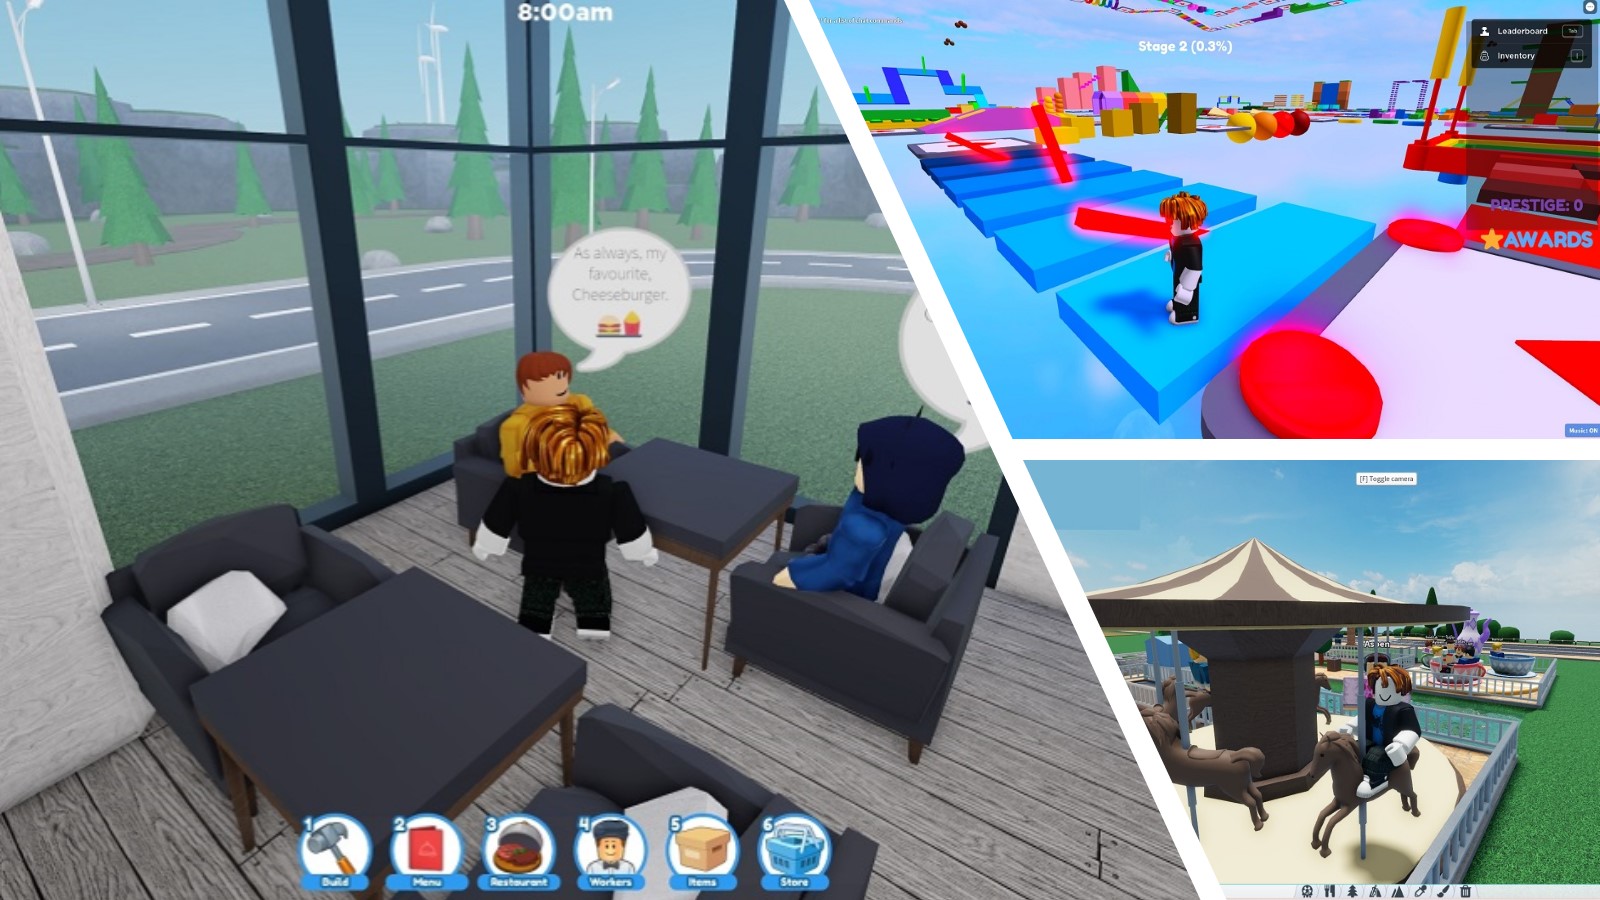 Roblox on X: My Games lets you & your friends play YOUR own ROBLOX game on  the Xbox One! Check it out!    / X